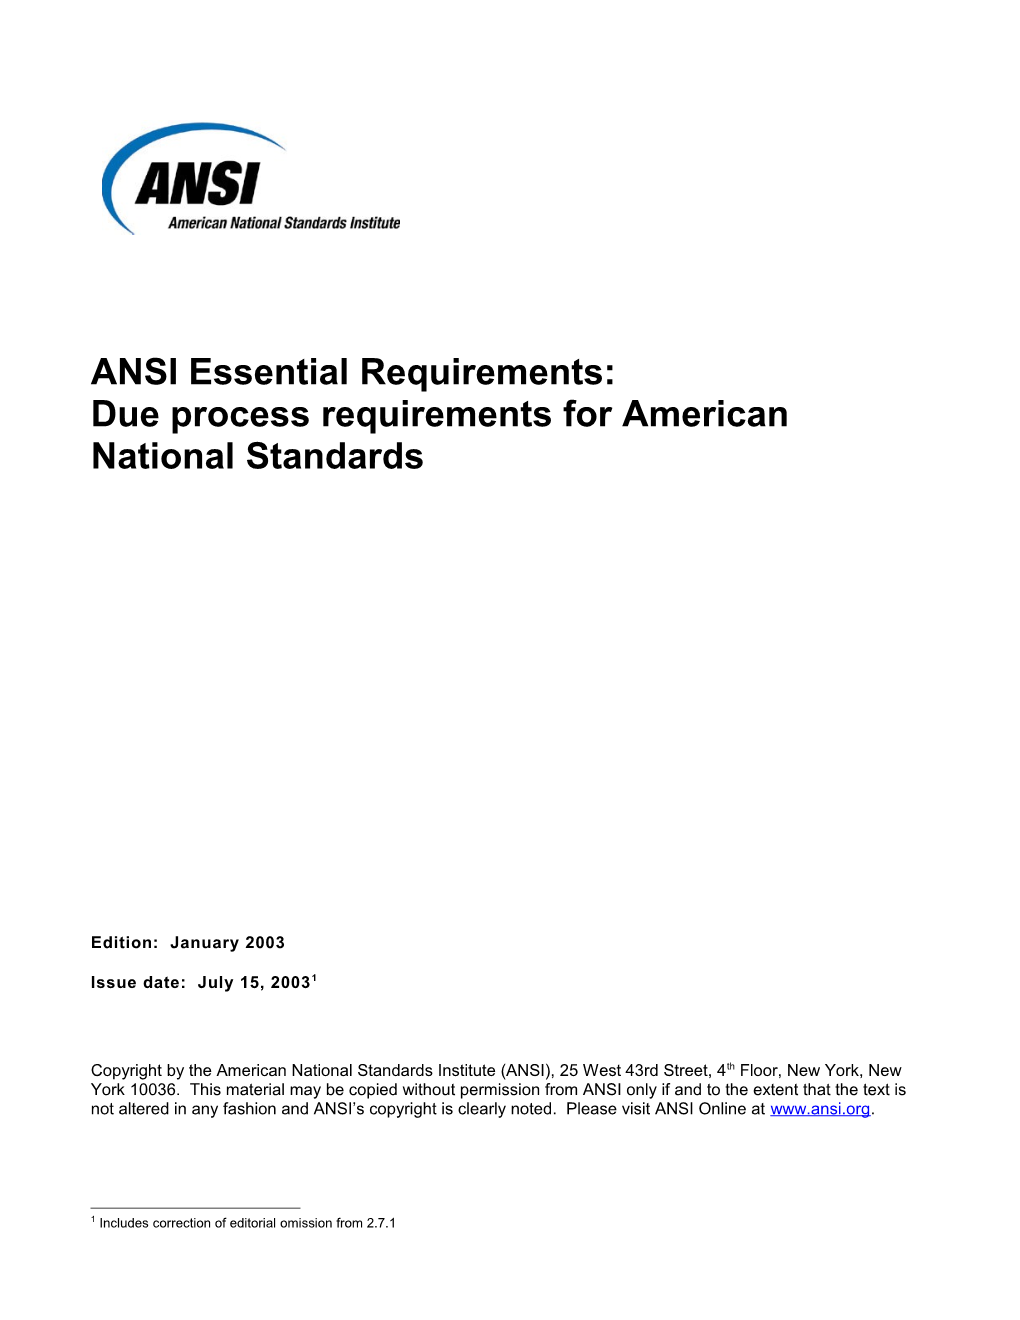 ANSI Essential Requirements: Due Process Requirements for American National Standards (2003